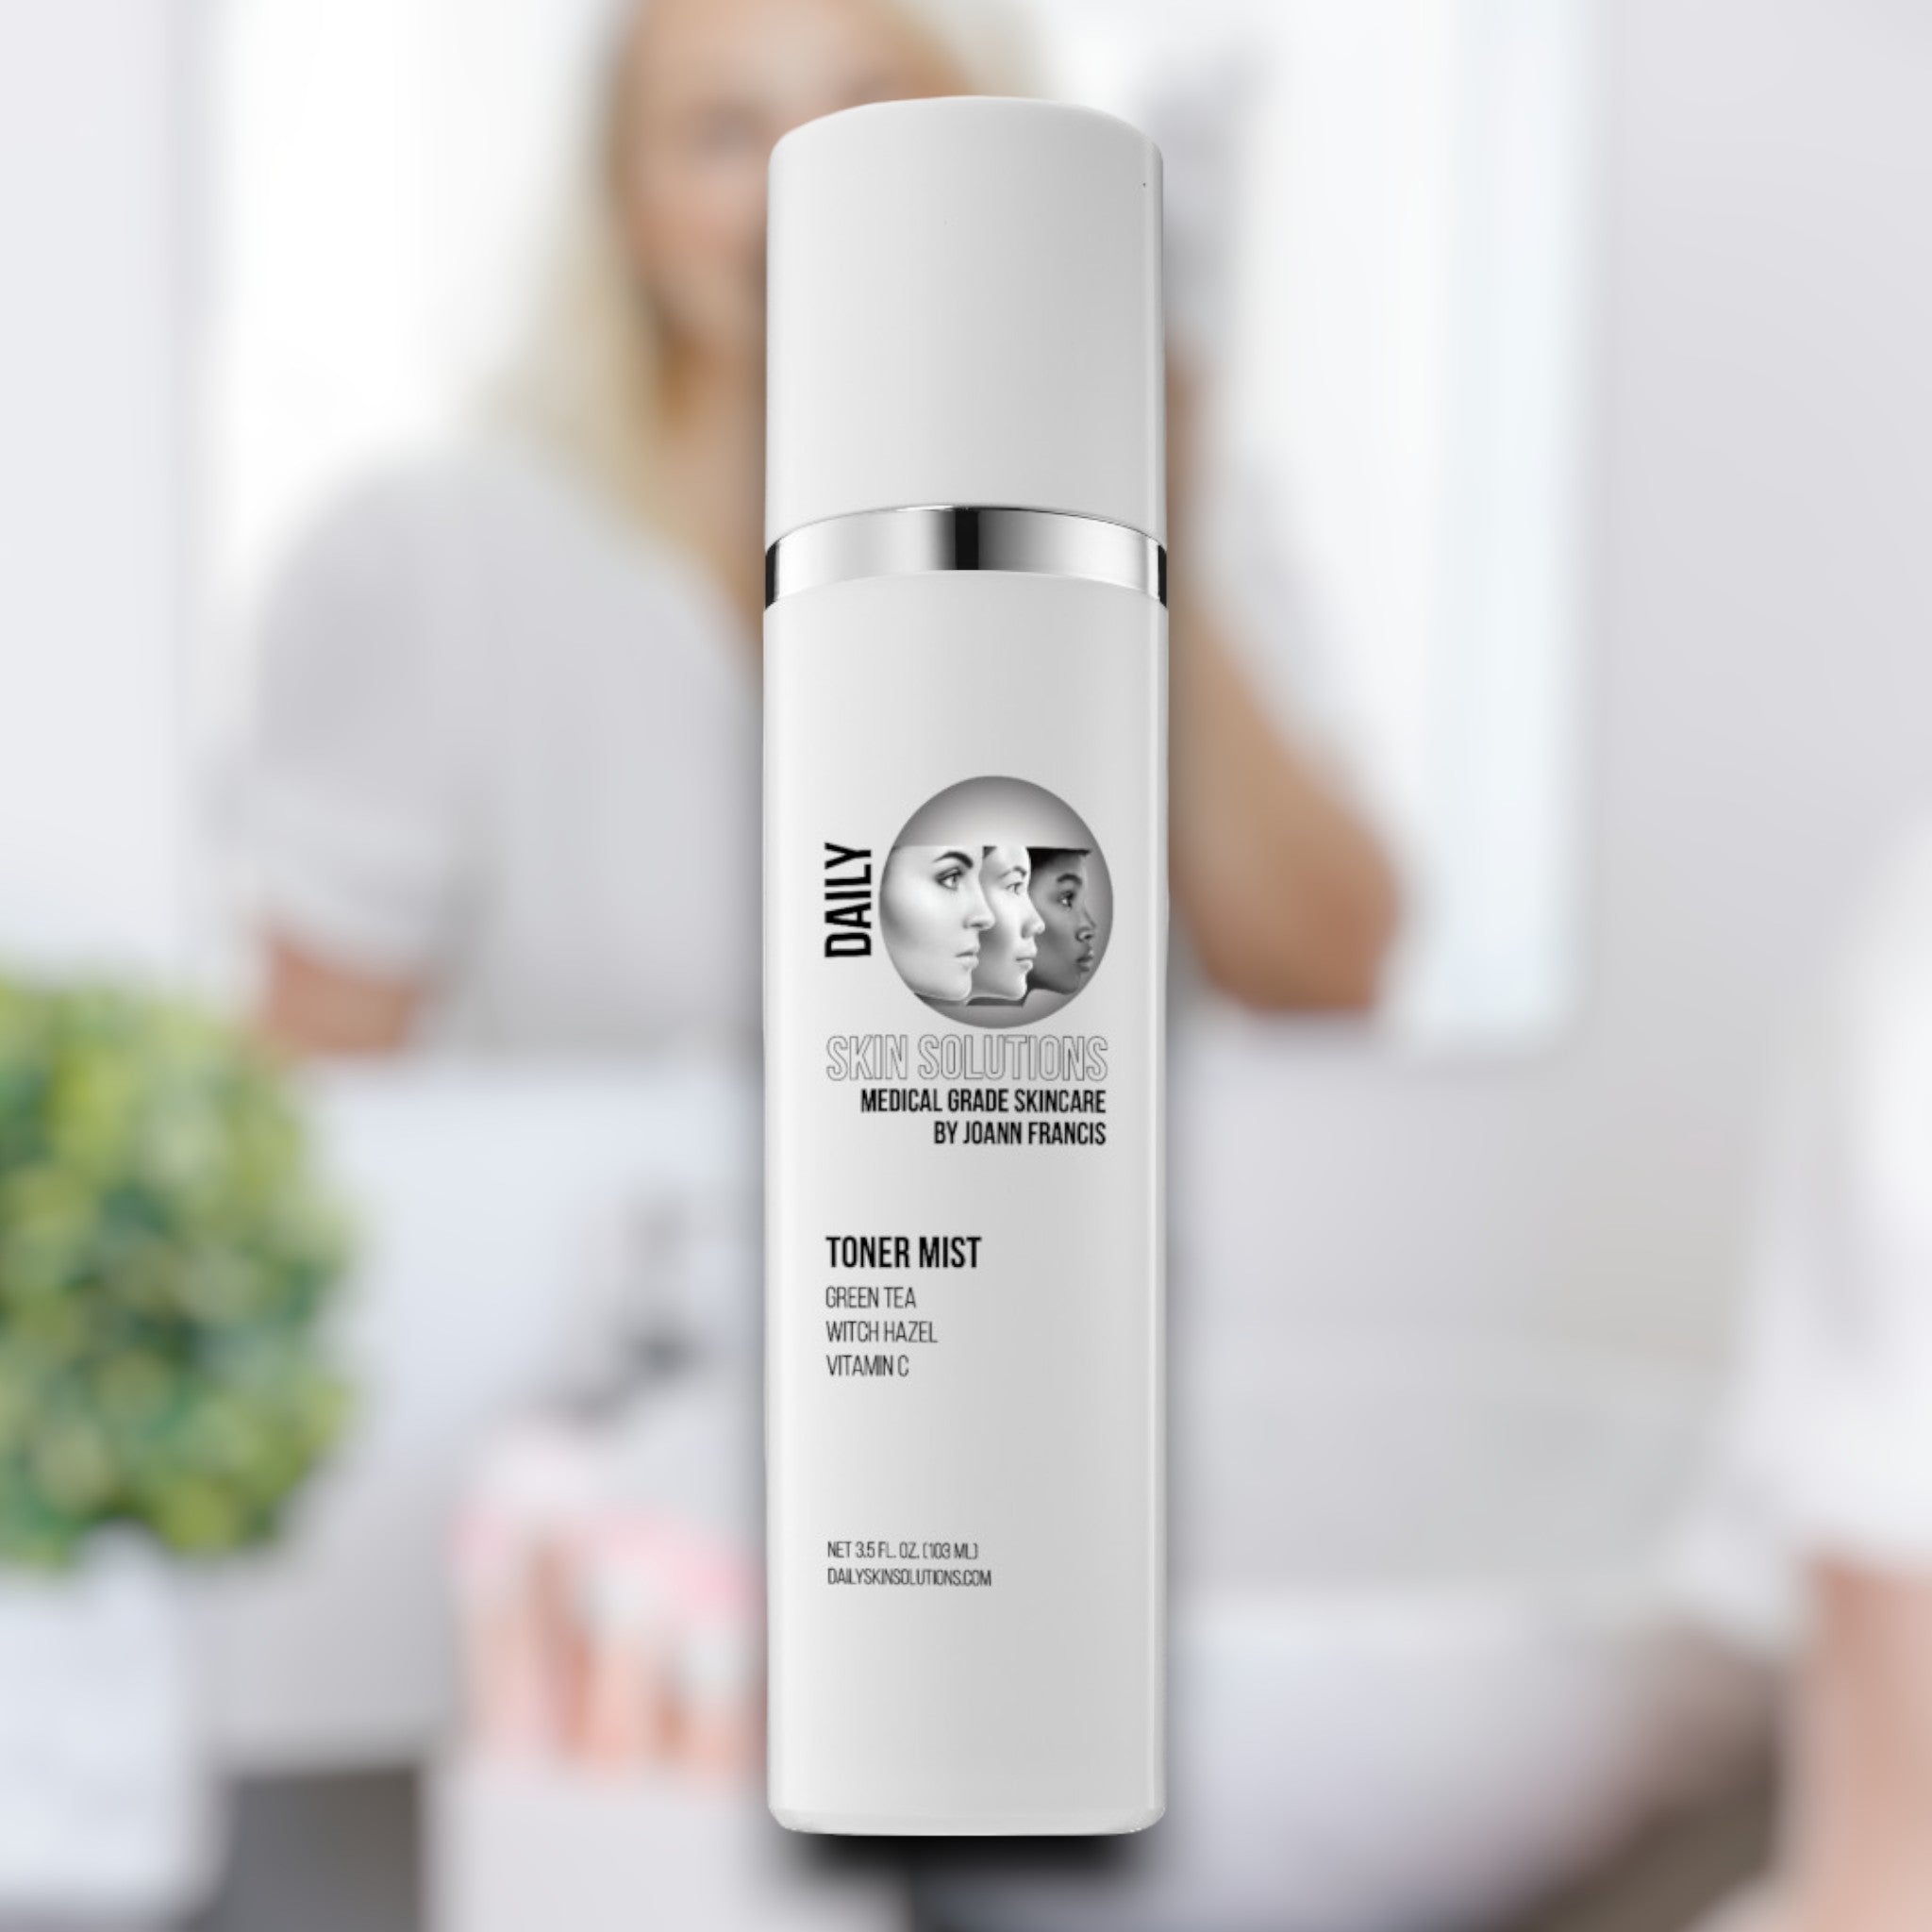 Toner Mist by Daily Skin Solutions